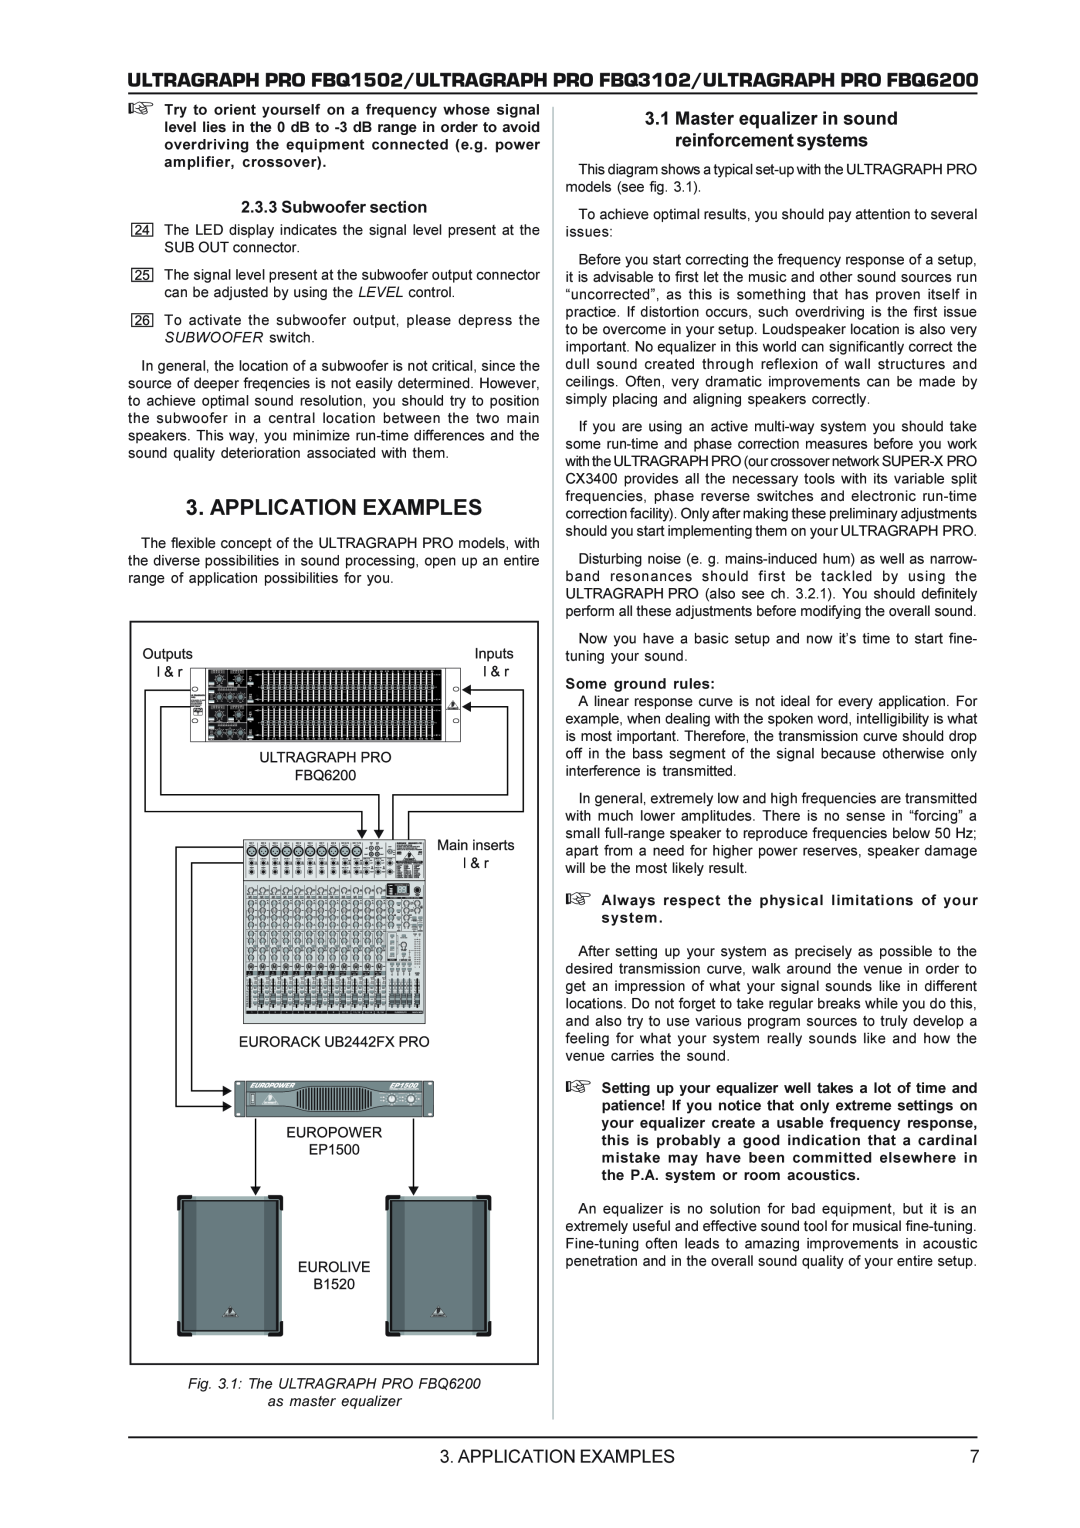 Behringer FBQ3102 manual Application Examples, Subwoofer section, 1 The ULTRAGRAPH PRO FBQ6200, as master equalizer 